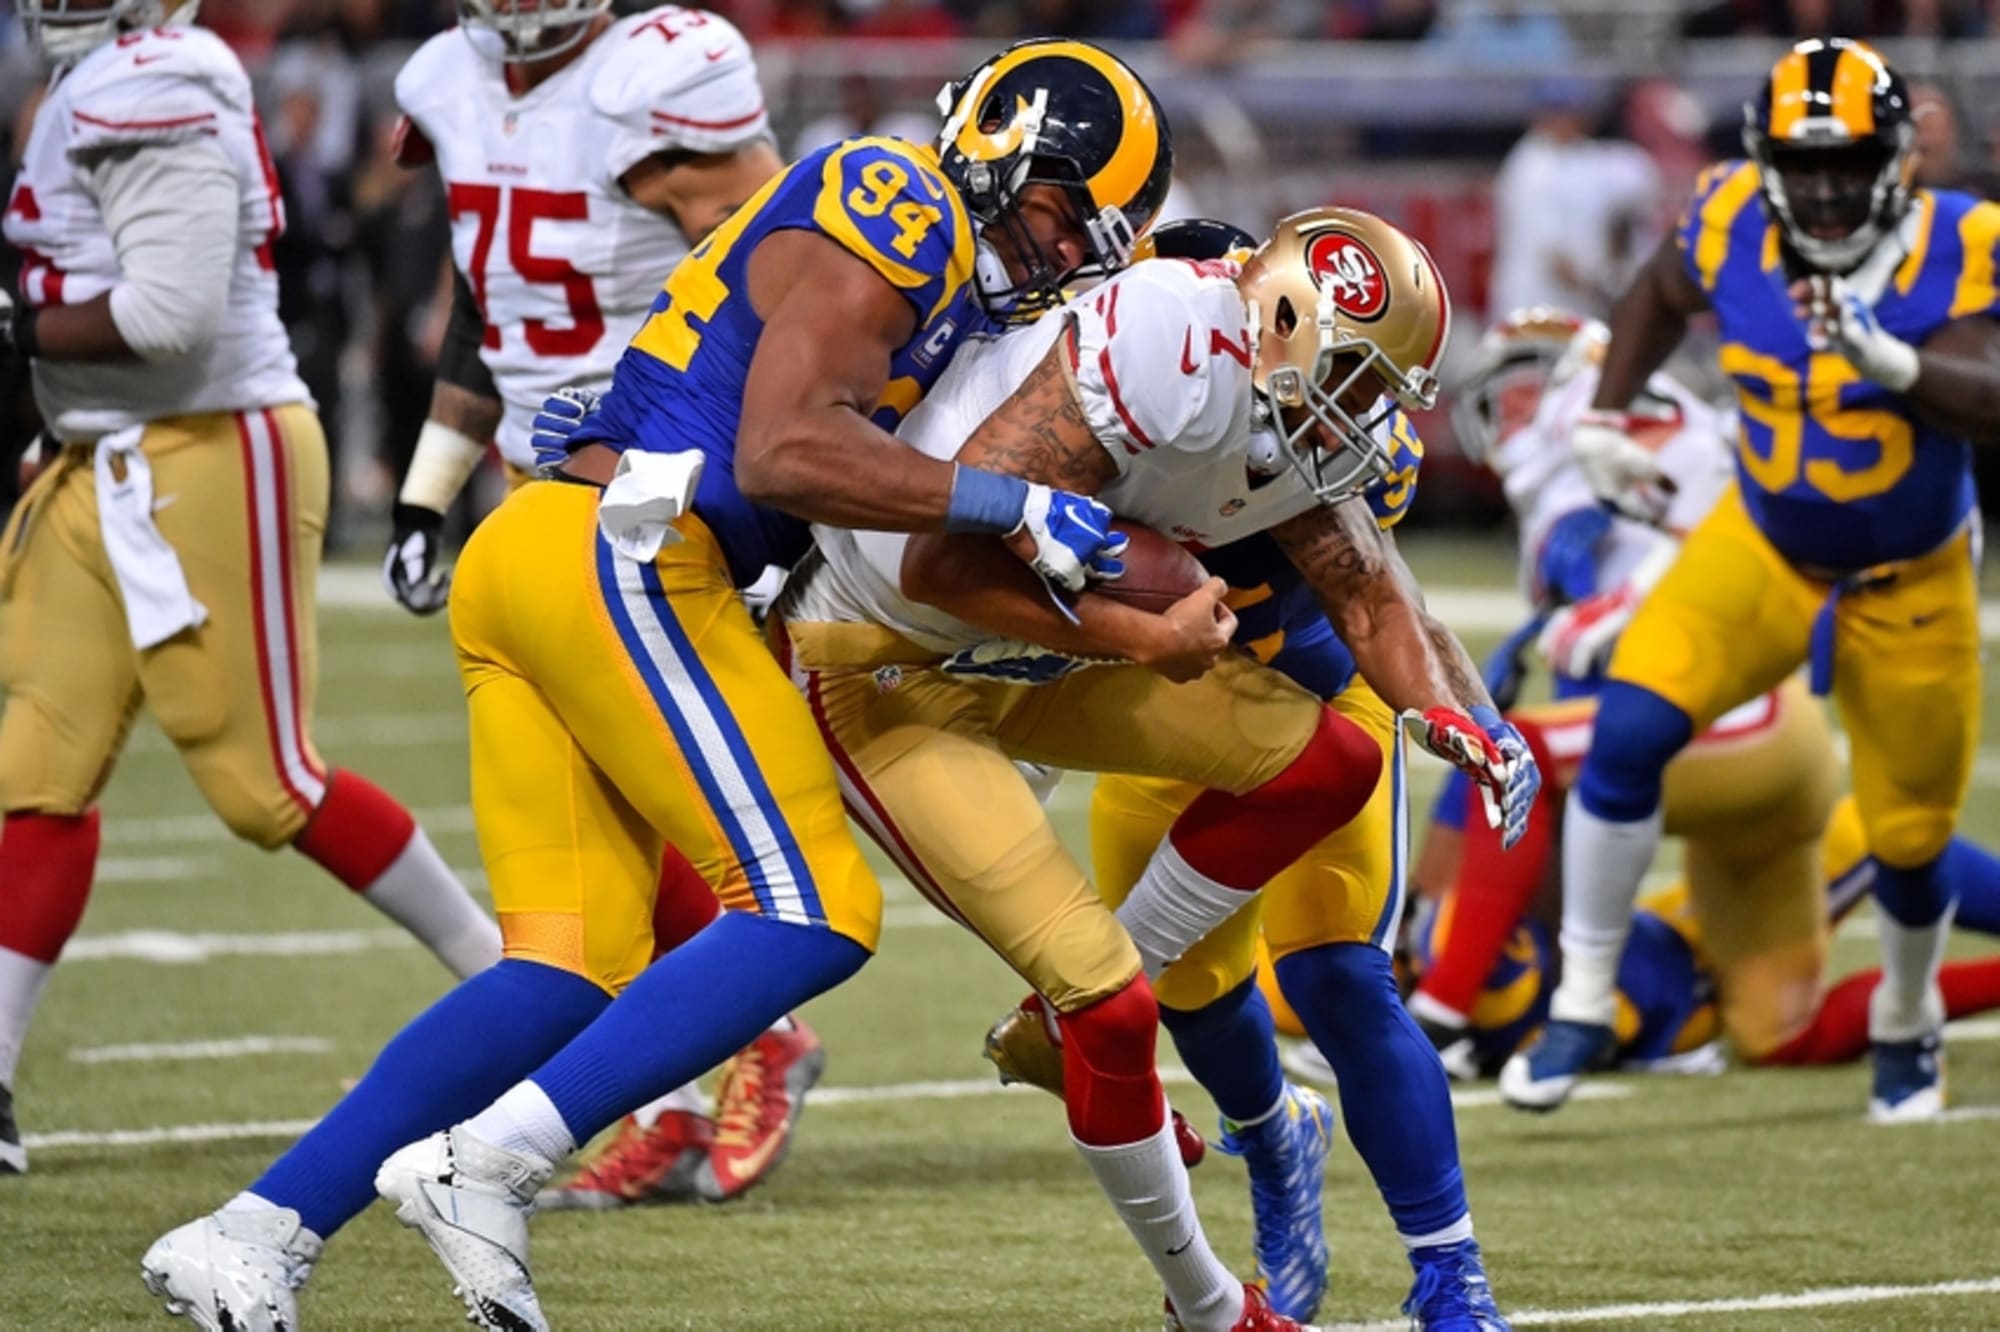 What time is the 49ers game on vs. Rams today? How to tune in live